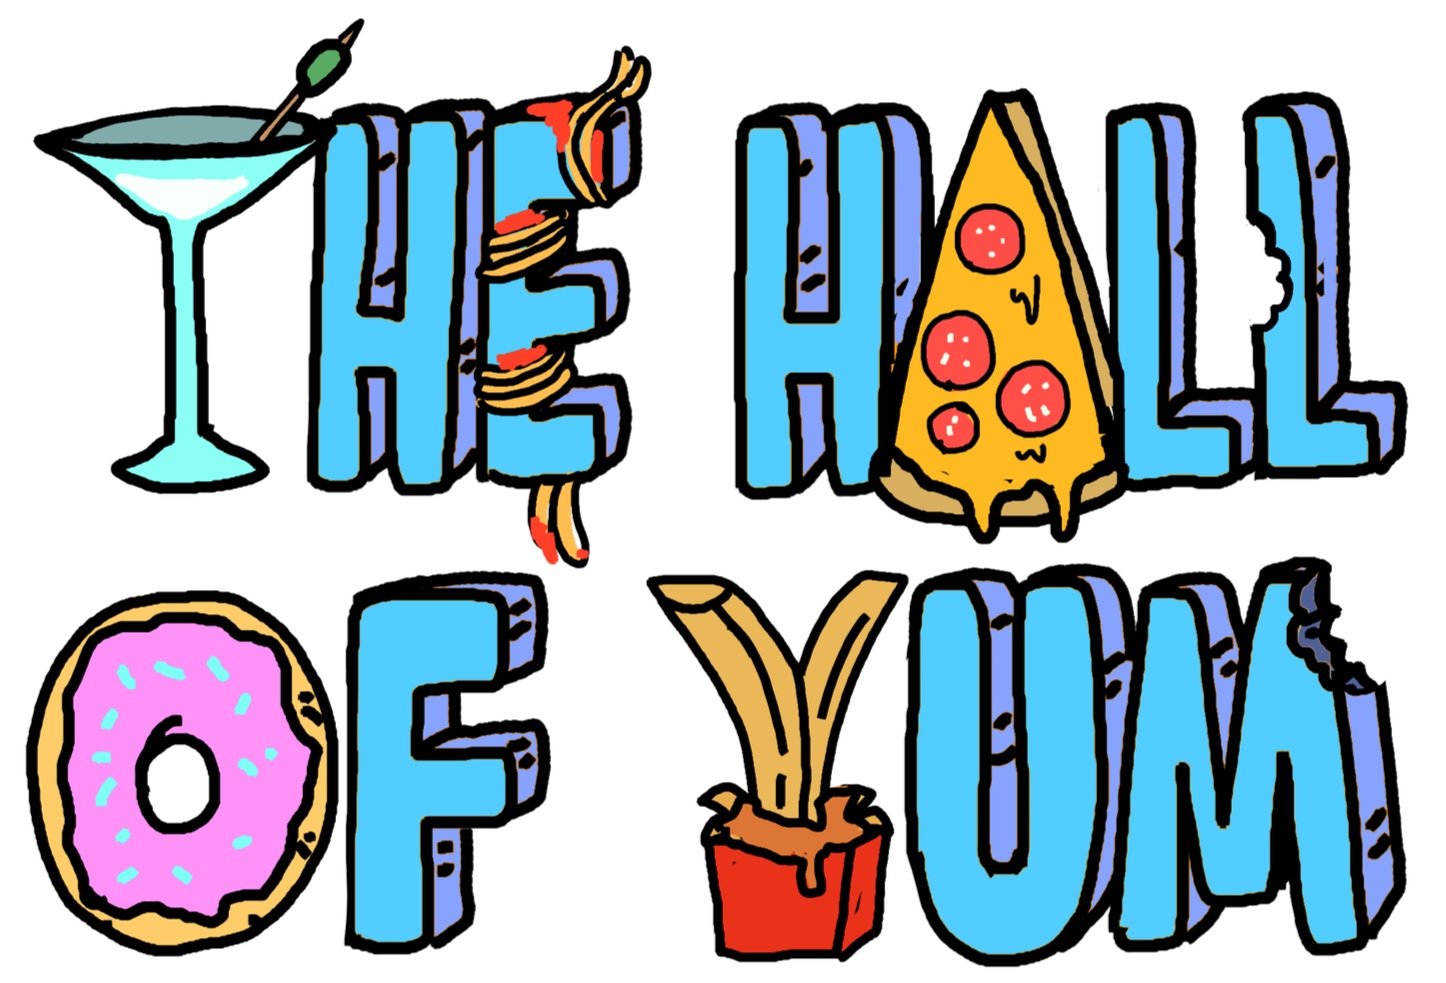 The Hall of Yum